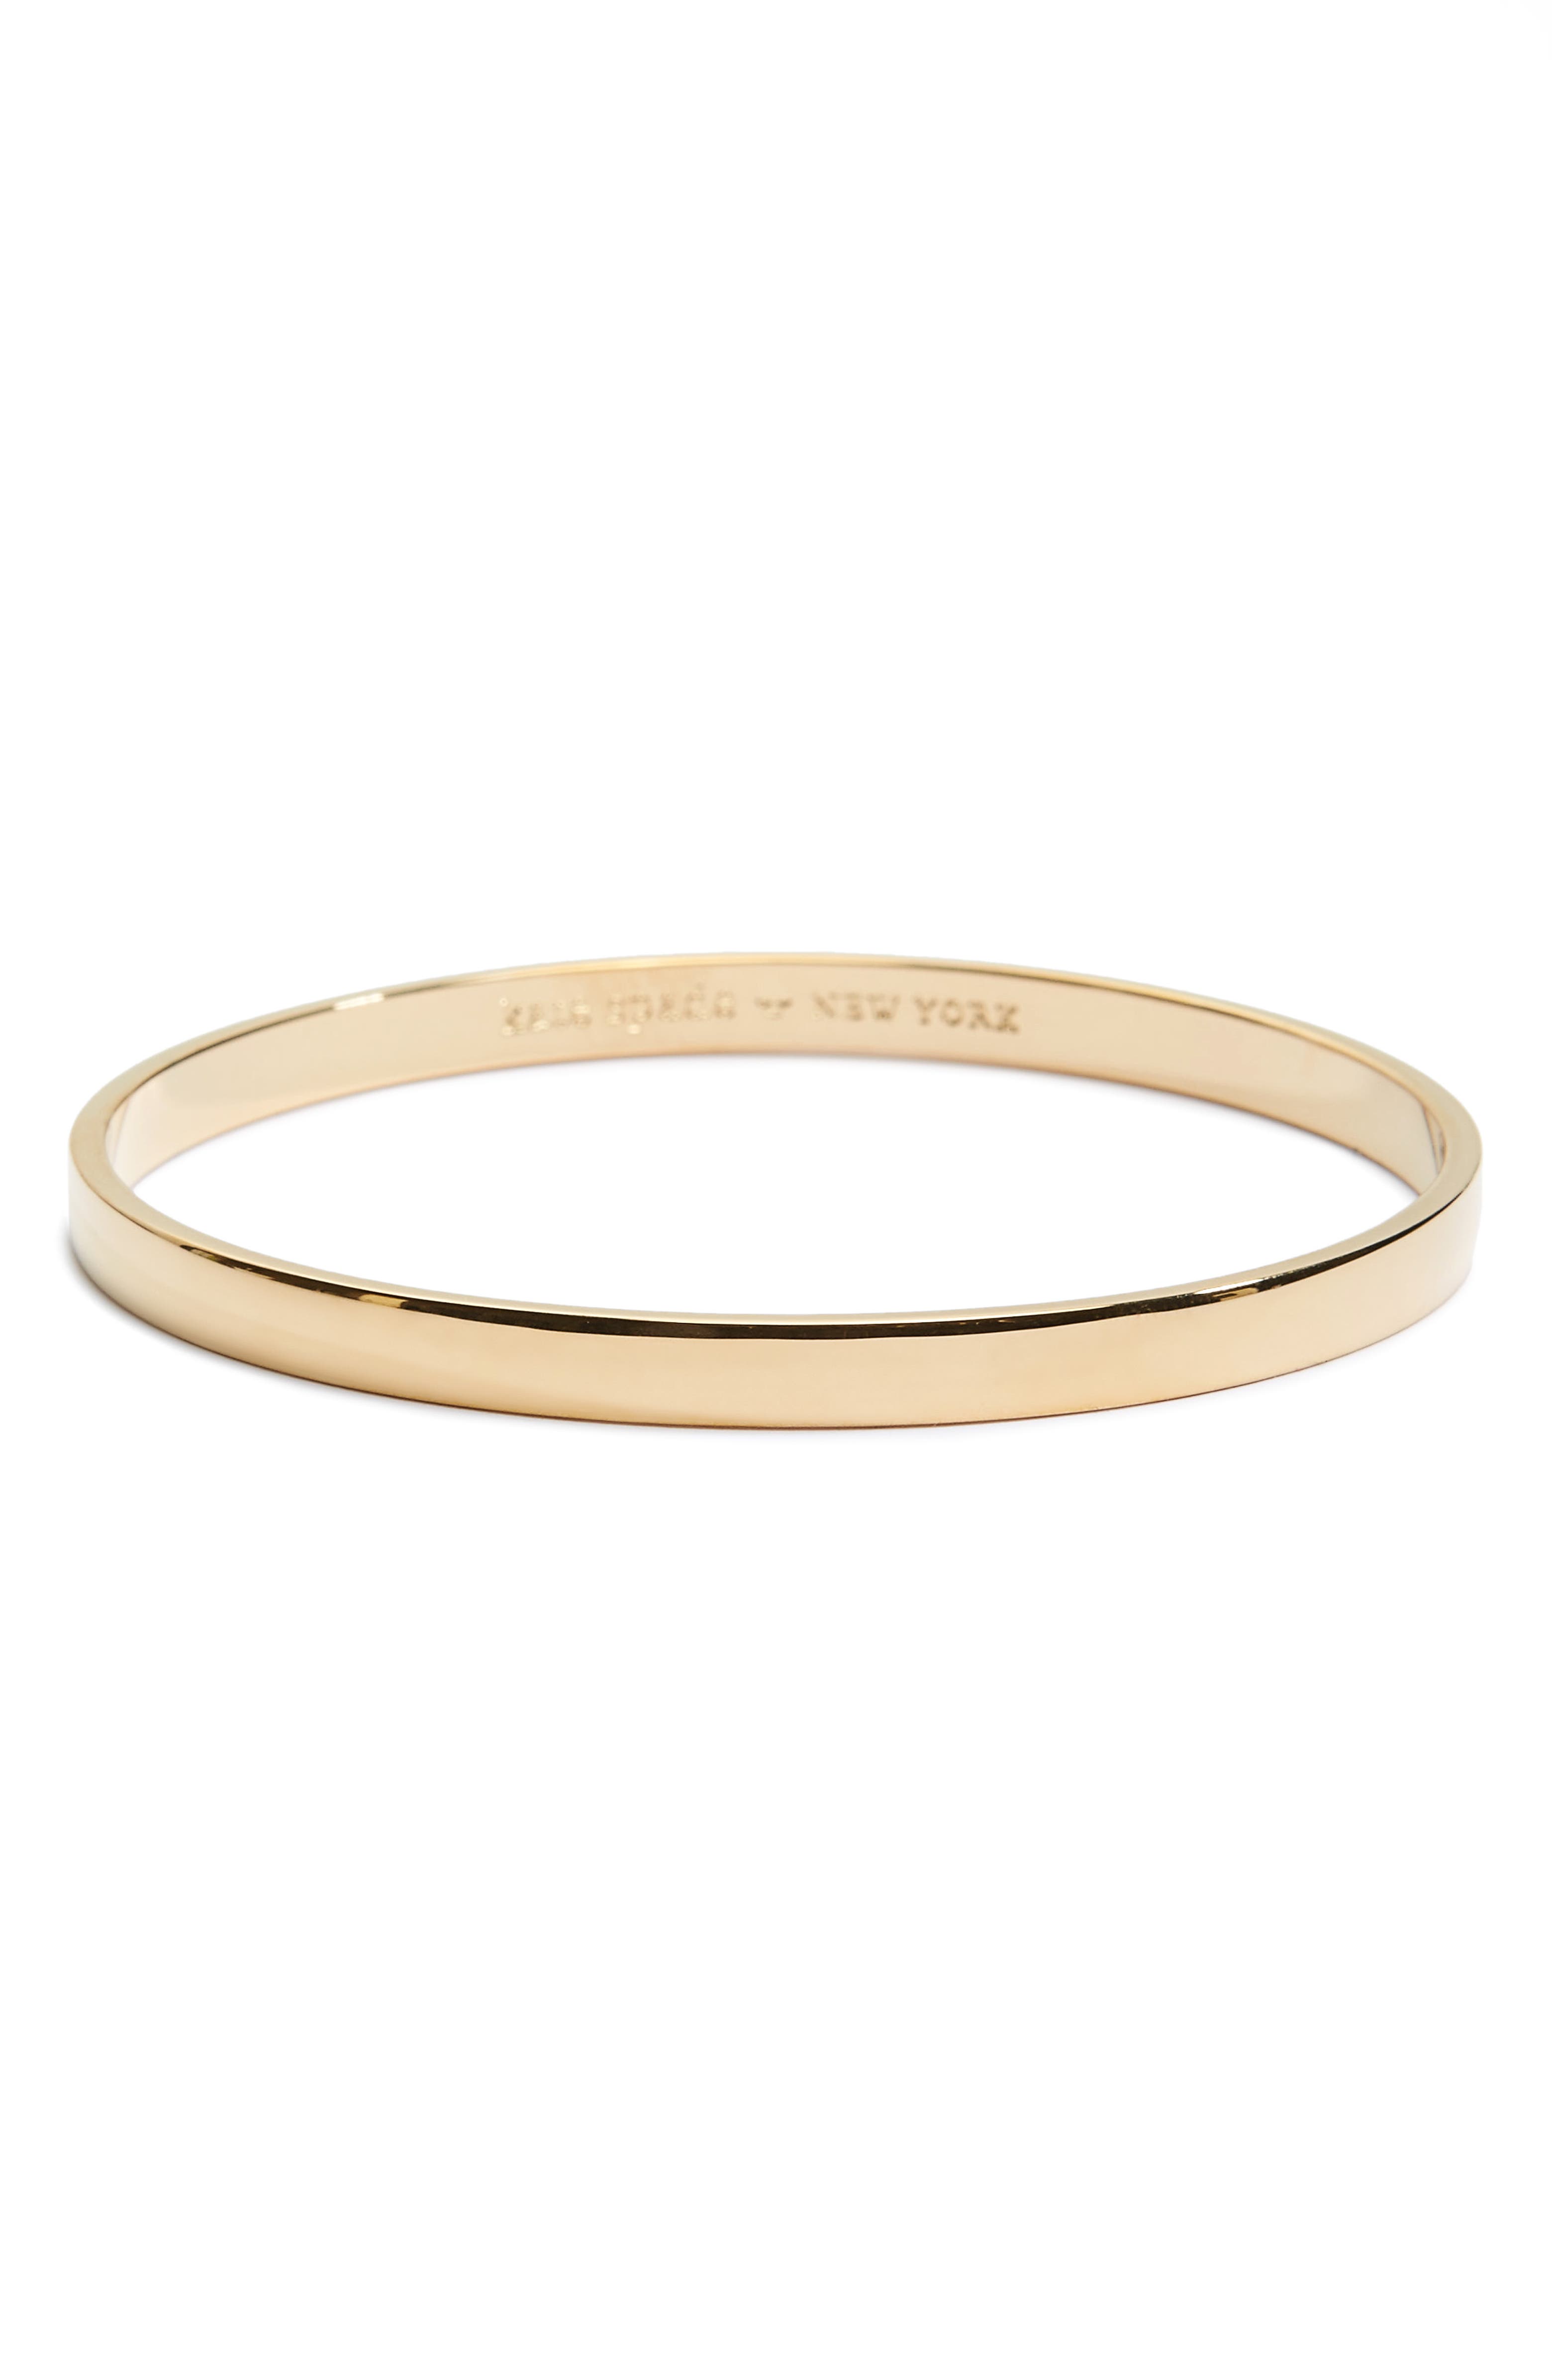 kate spade new york idiom heart of gold bangle Nordstrom